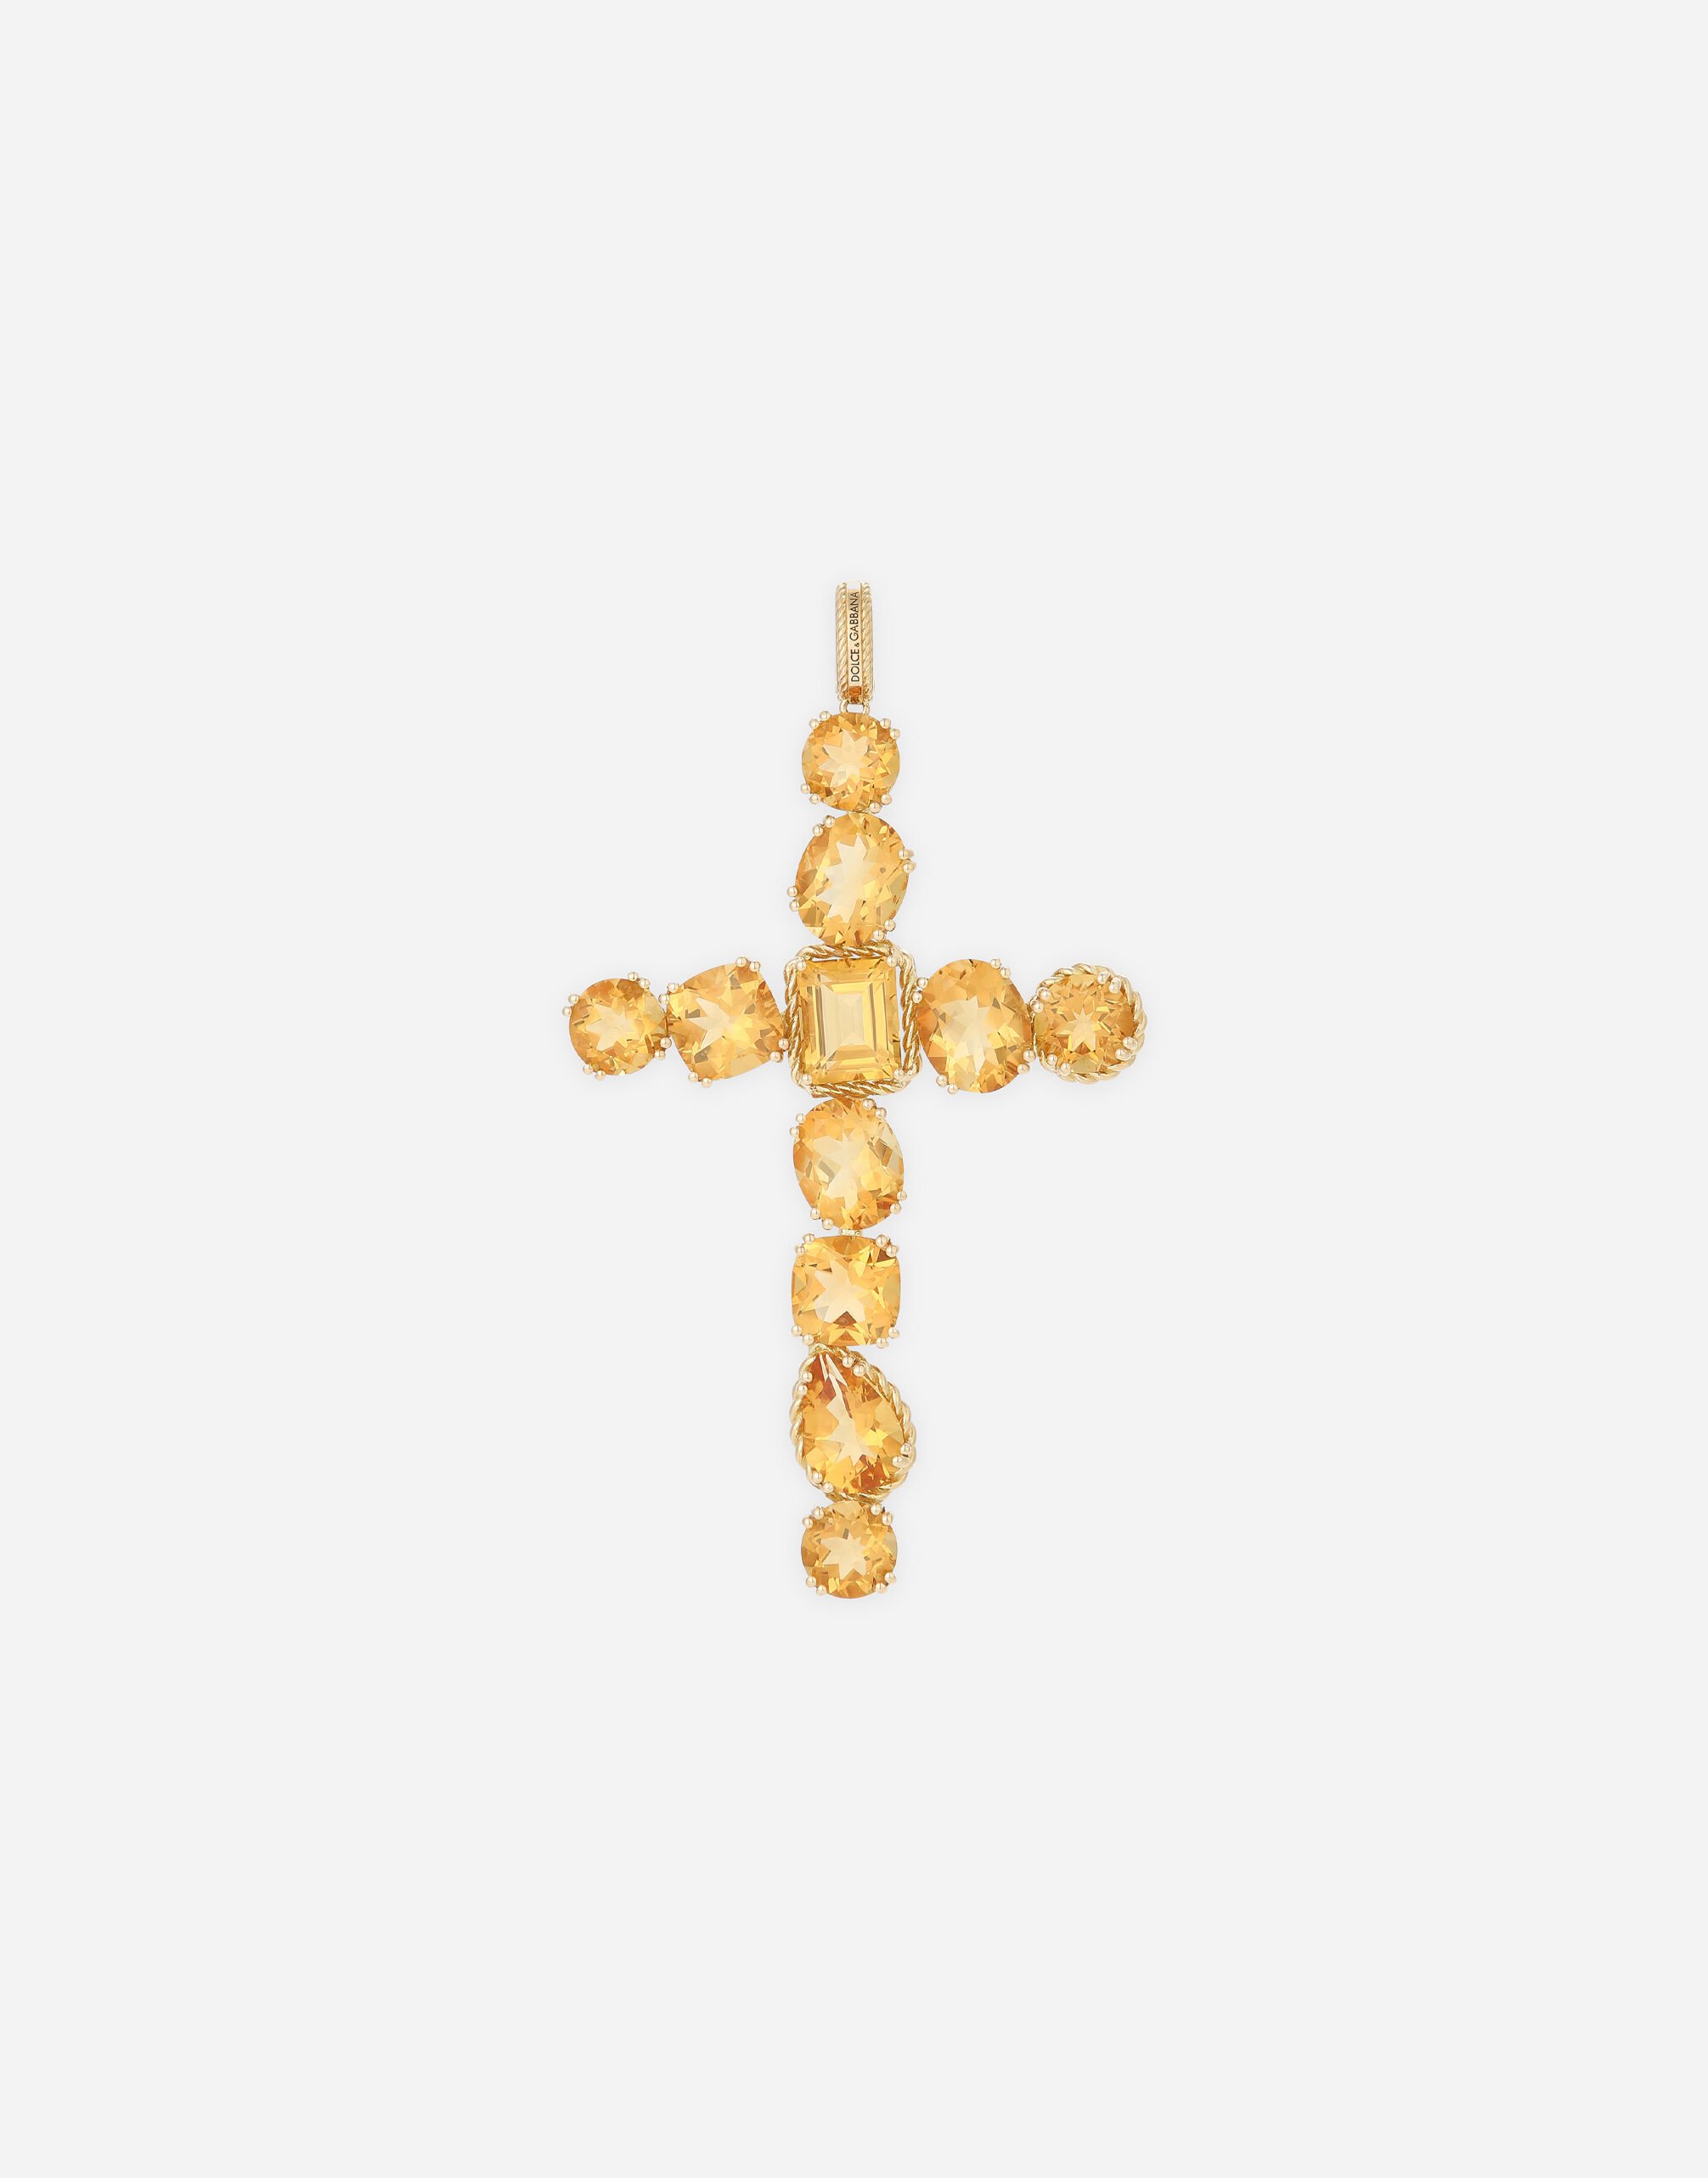 Dolce & Gabbana Anna charm in yellow gold 18kt with citrines quartzes Gold WANR1GWMIXQ